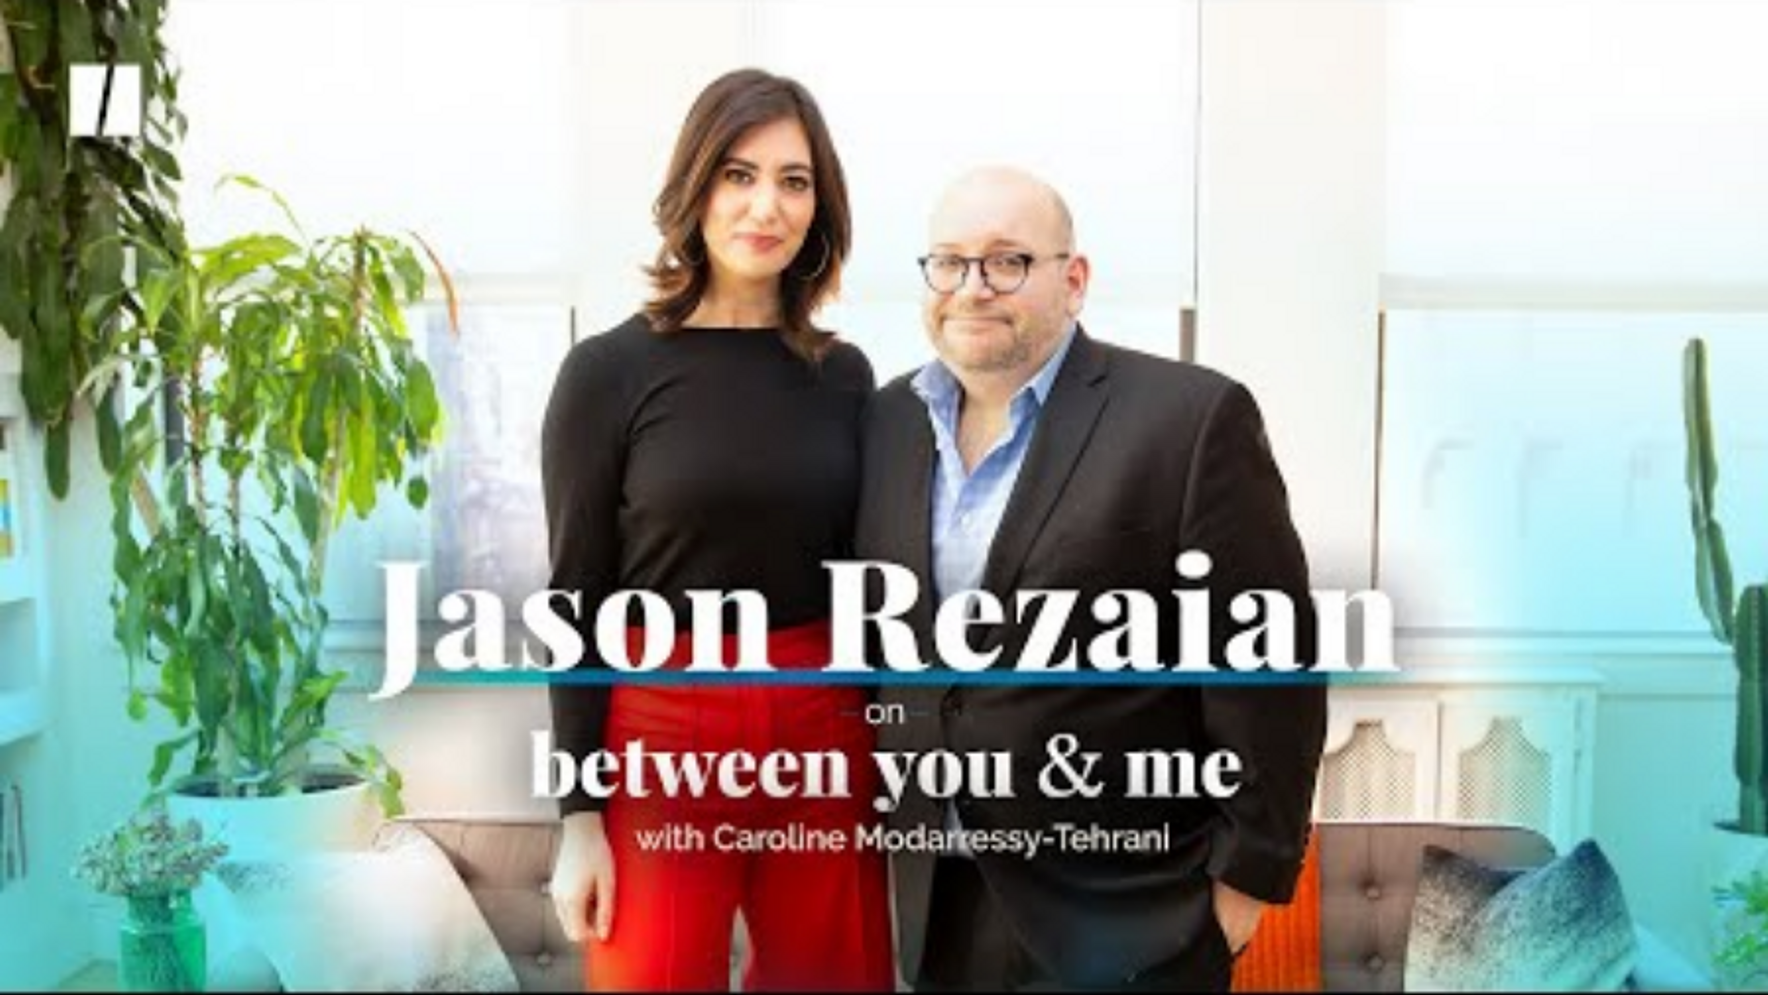 Political Prisoner Jason Rezaian Reflects On His Time In Solitary Confinement In Iran